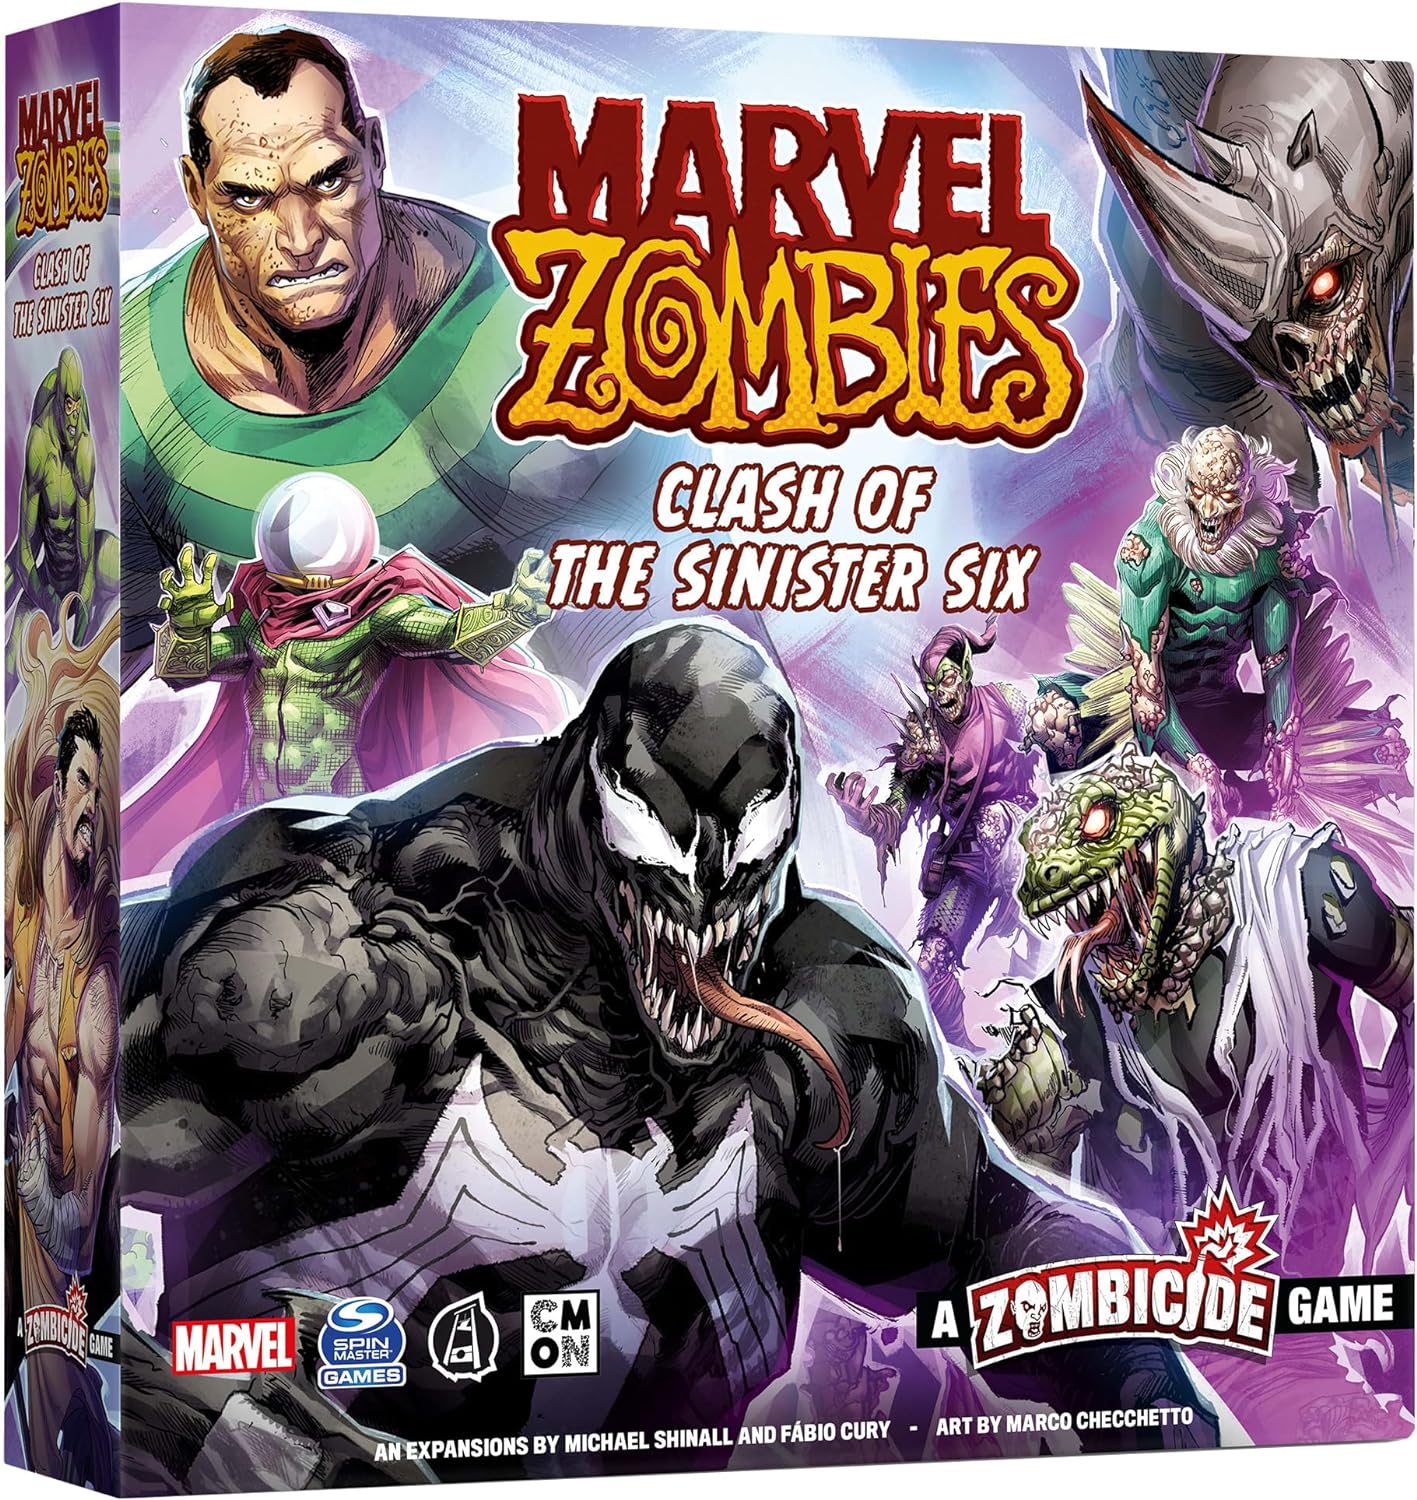 Marvel Zombies: A Zombicide Game: Clash of the sinister six | Multizone: Comics And Games